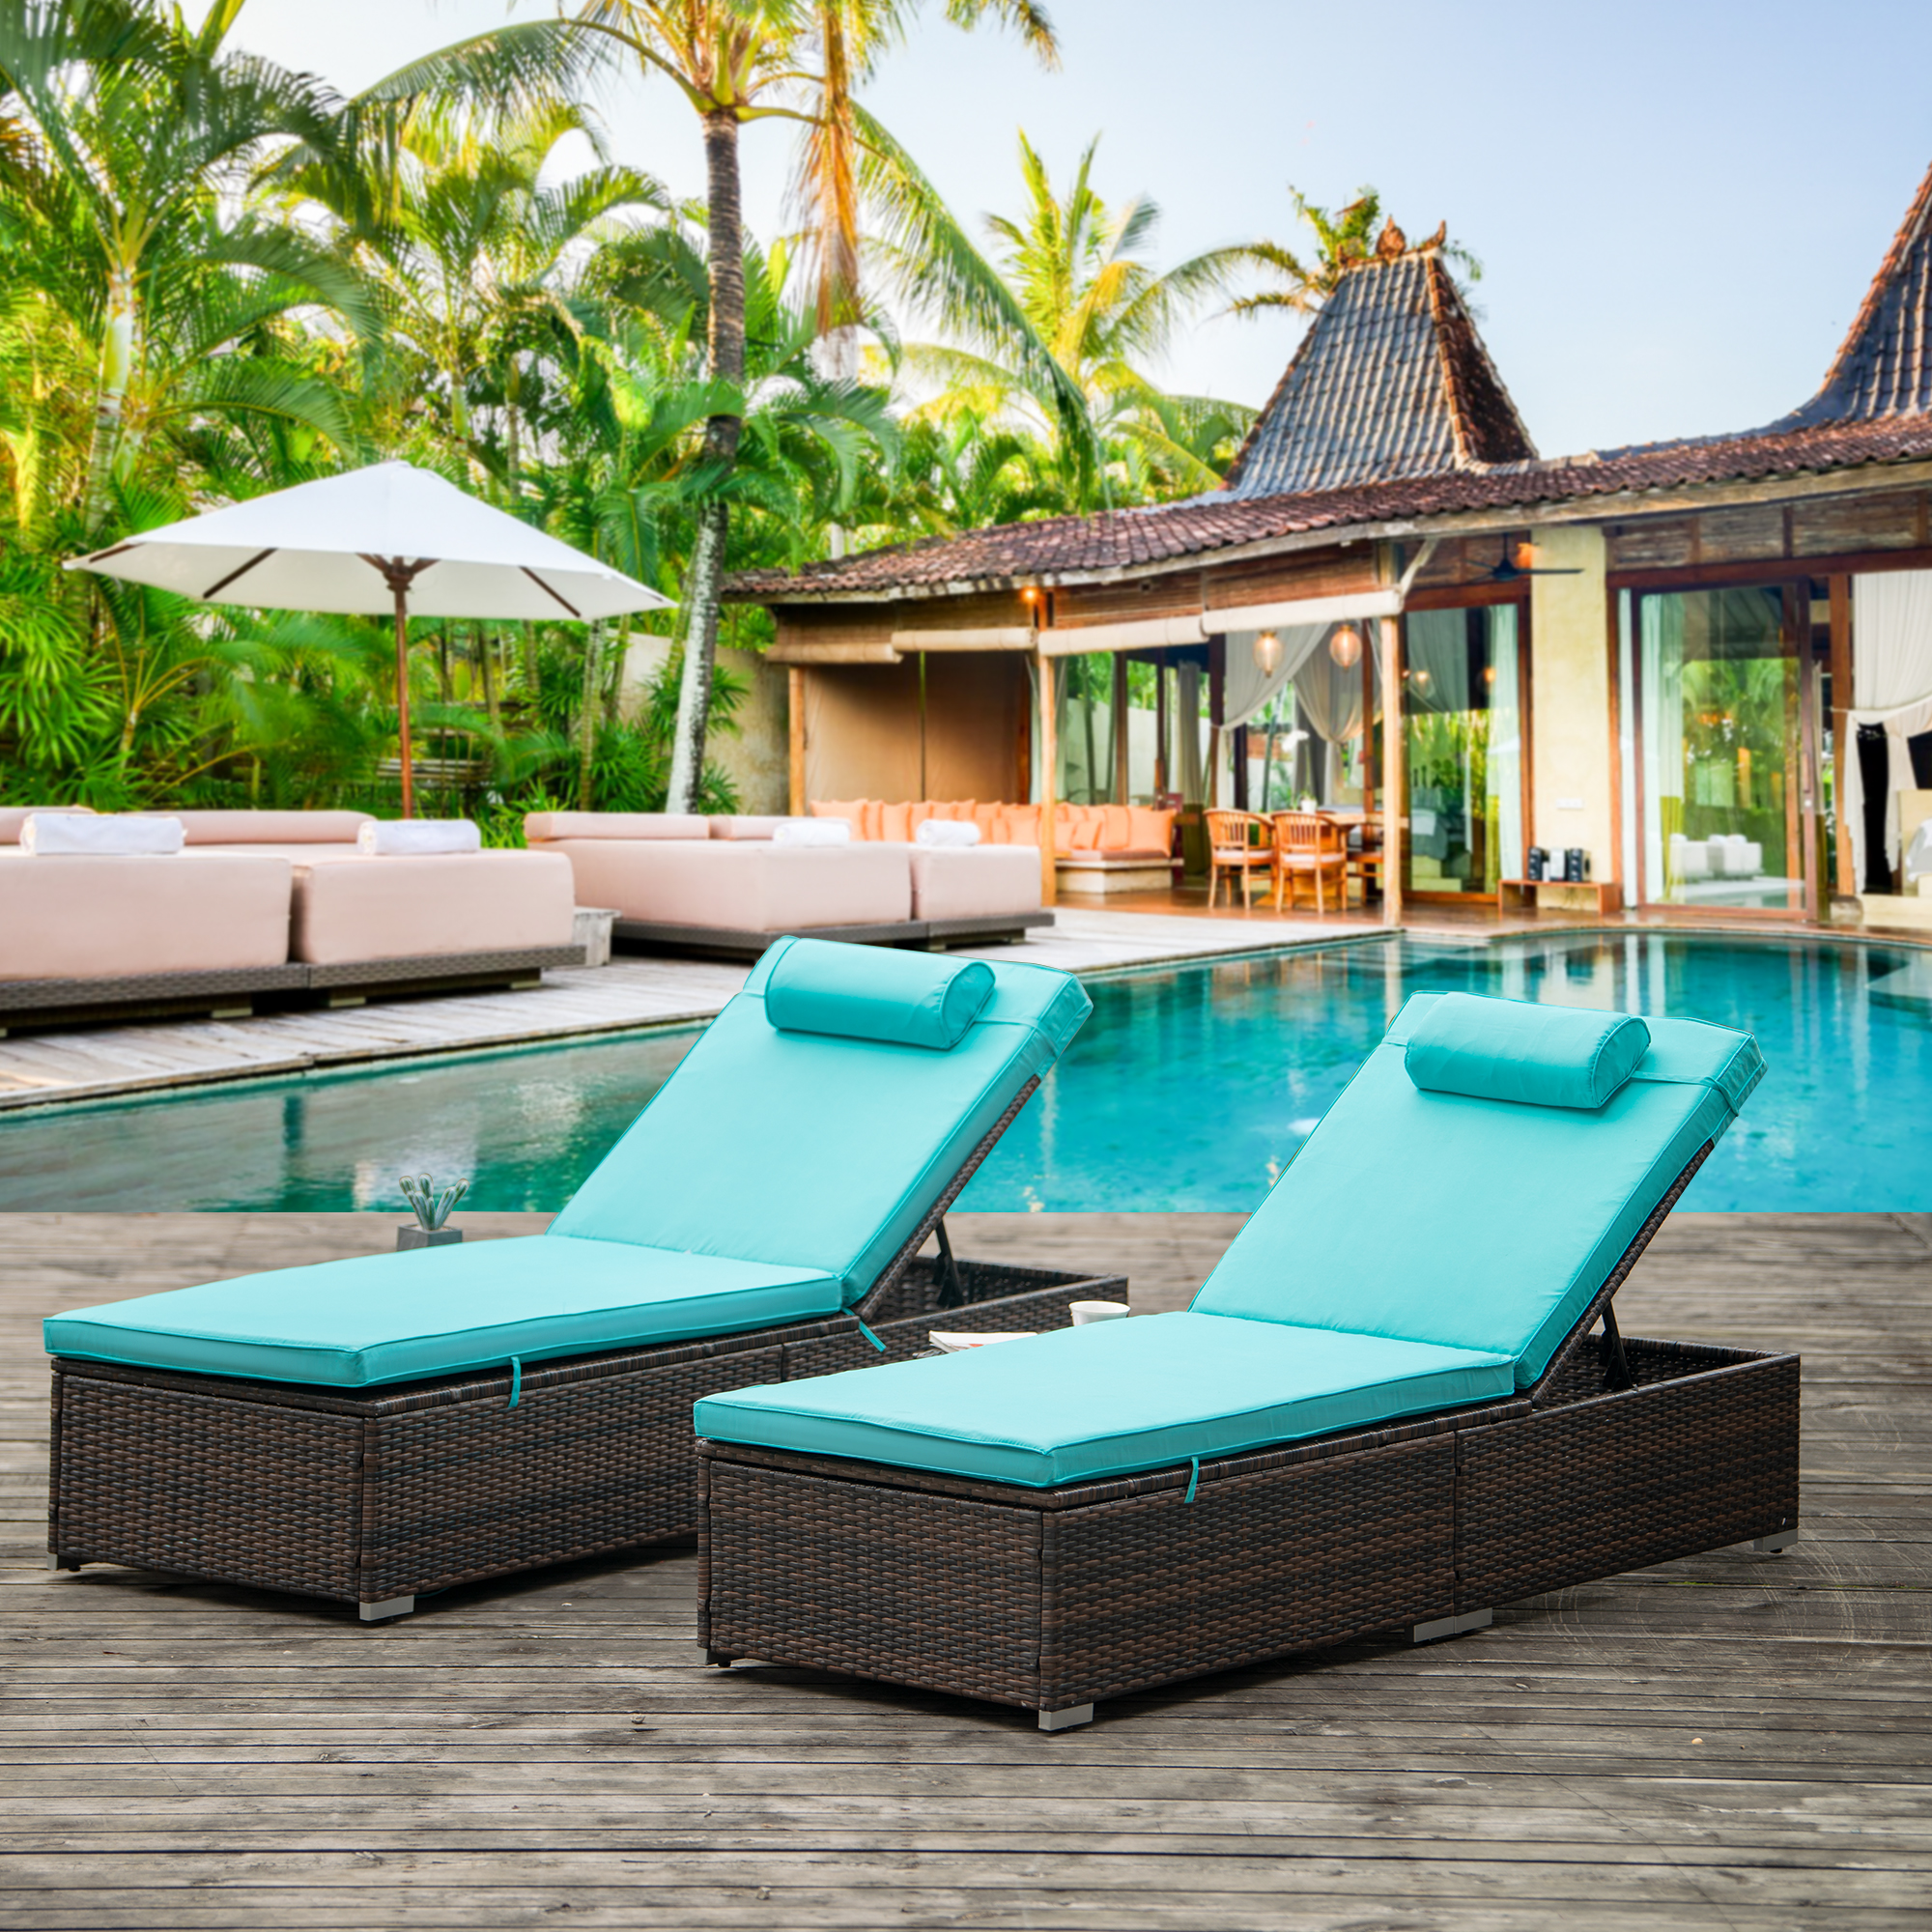 2 Piece Patio Chaise Lounge Furniture Set with Side Table, 5-Position Adjustable Cushioned Rattan Chaise Lounge with Head Pillow, PE Rattan Backrest Lounge Chairs Set for Pool Balcony Deck Yard, B68 - image 1 of 11